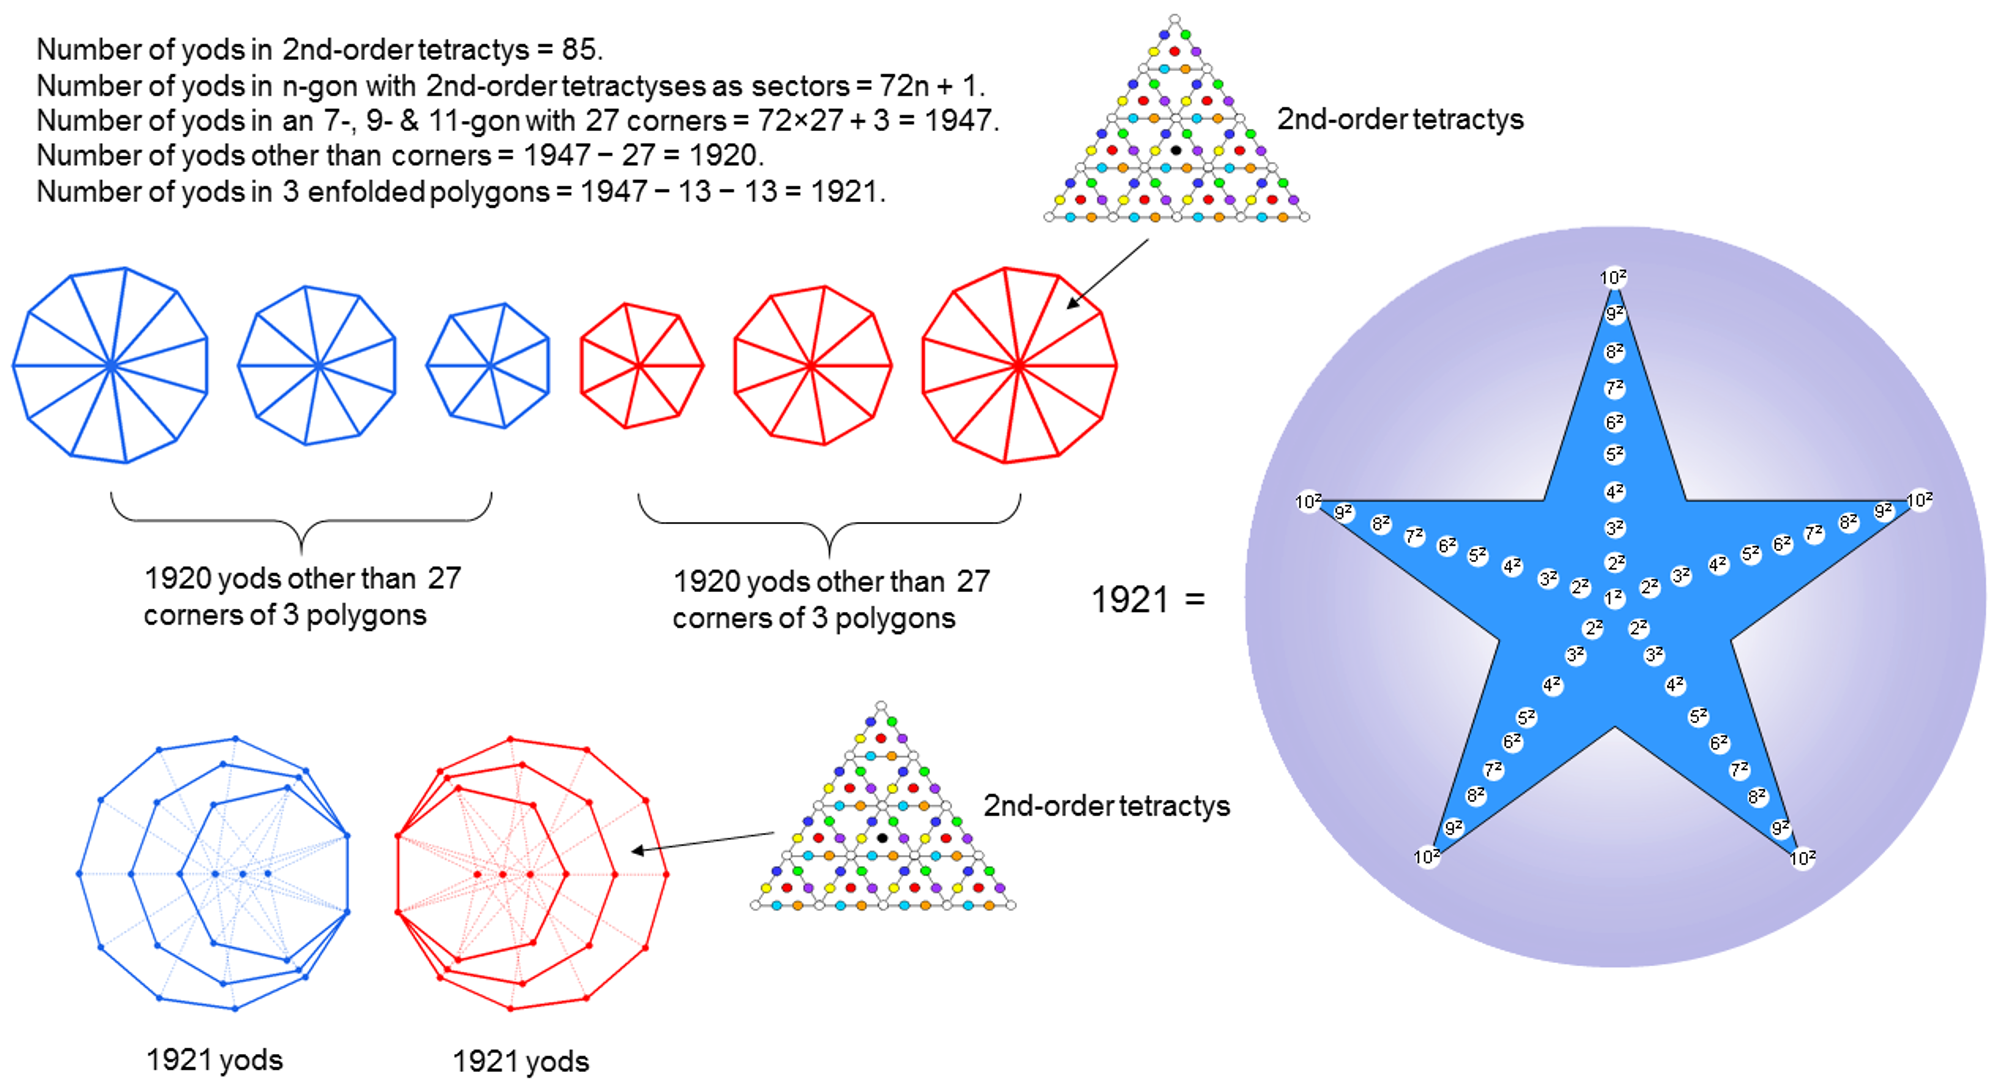 (3840 yods in (3+3) separate polygons with 2nd-order tetractys sectors